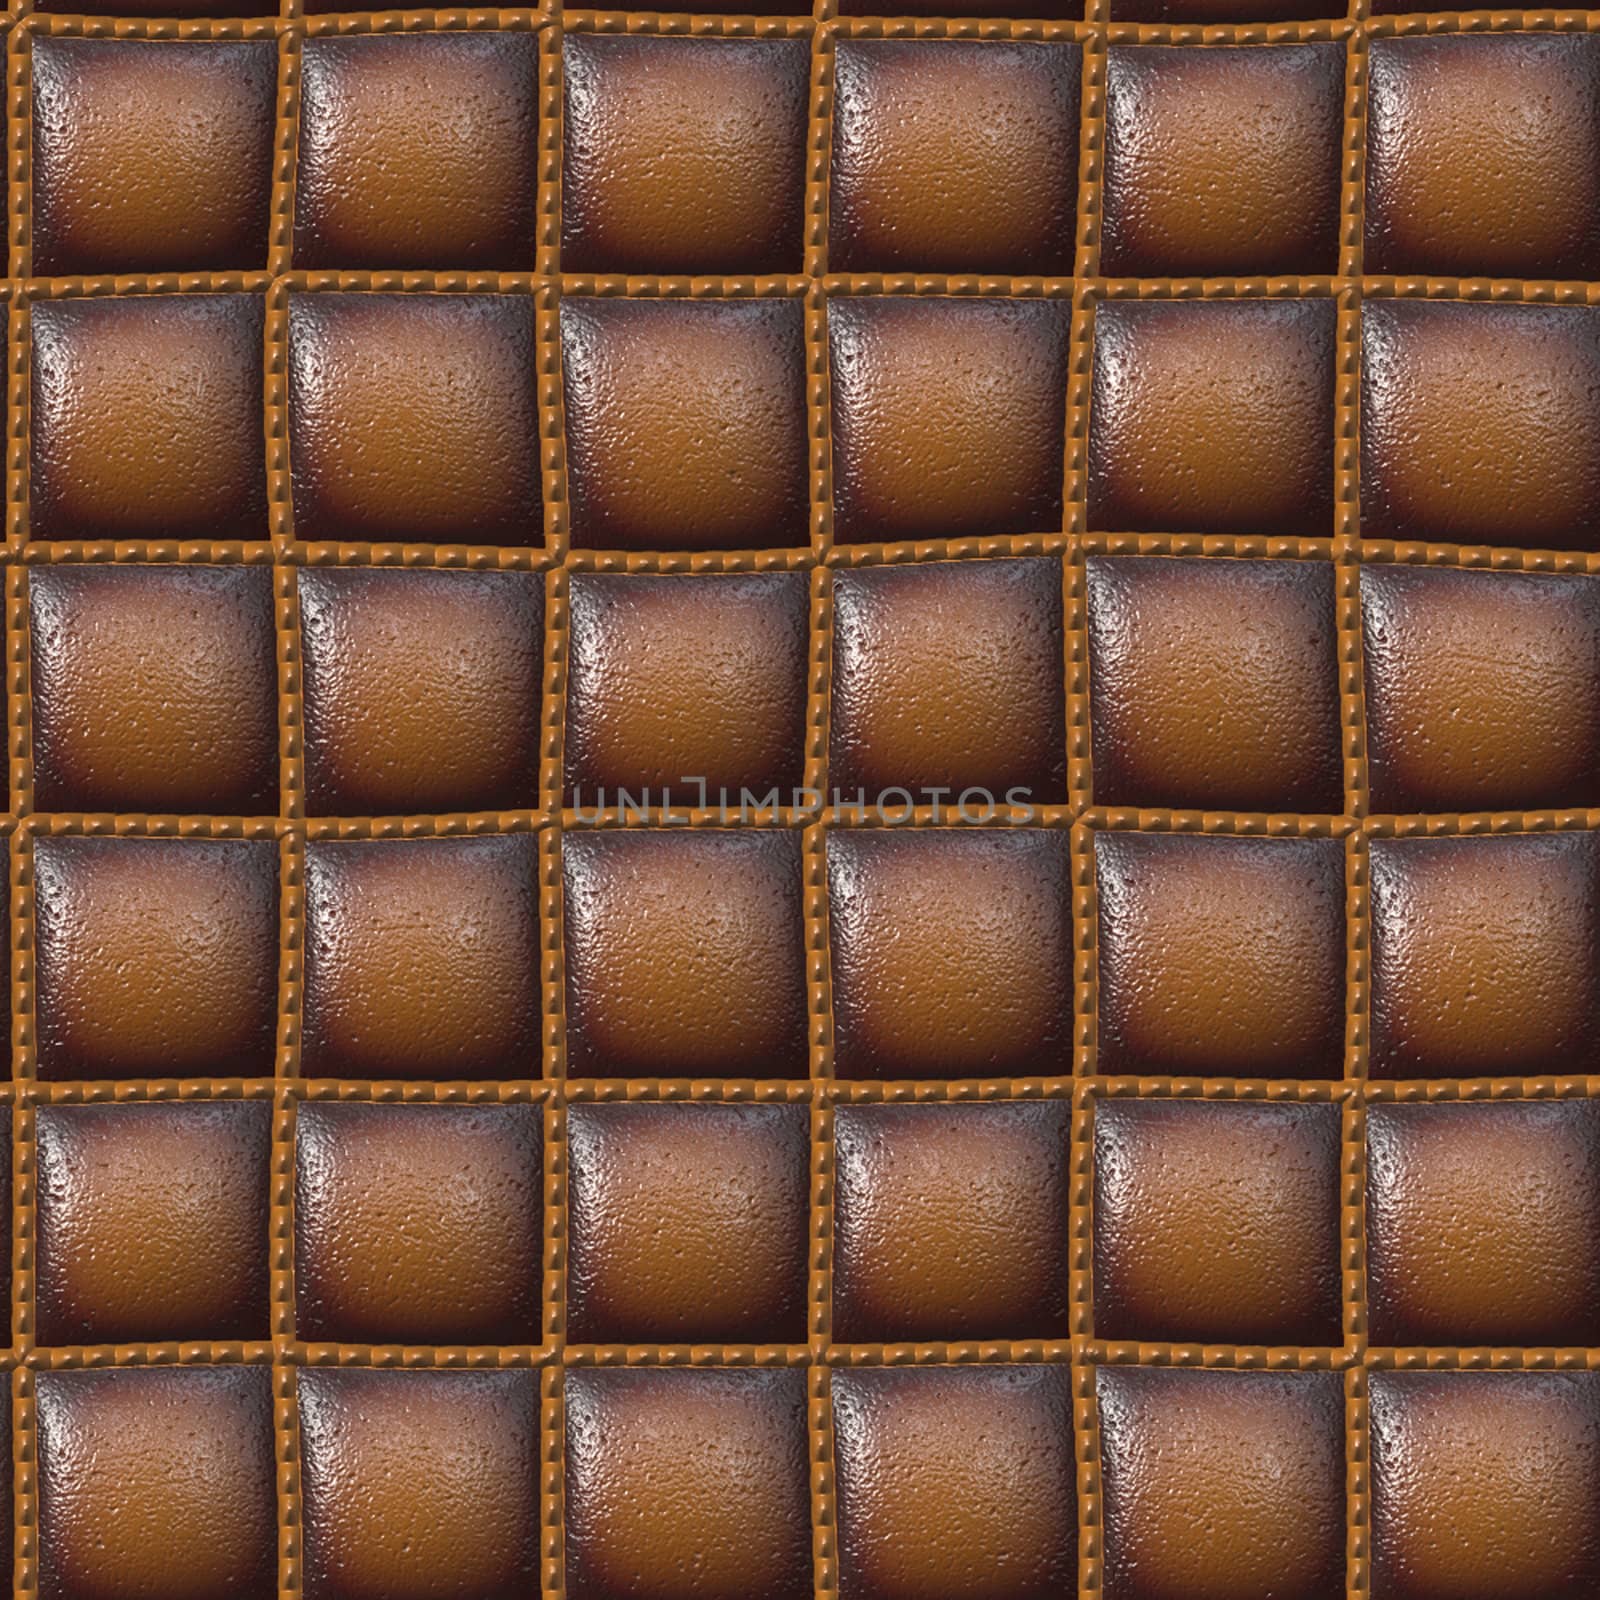 shinning brown leather upholstery